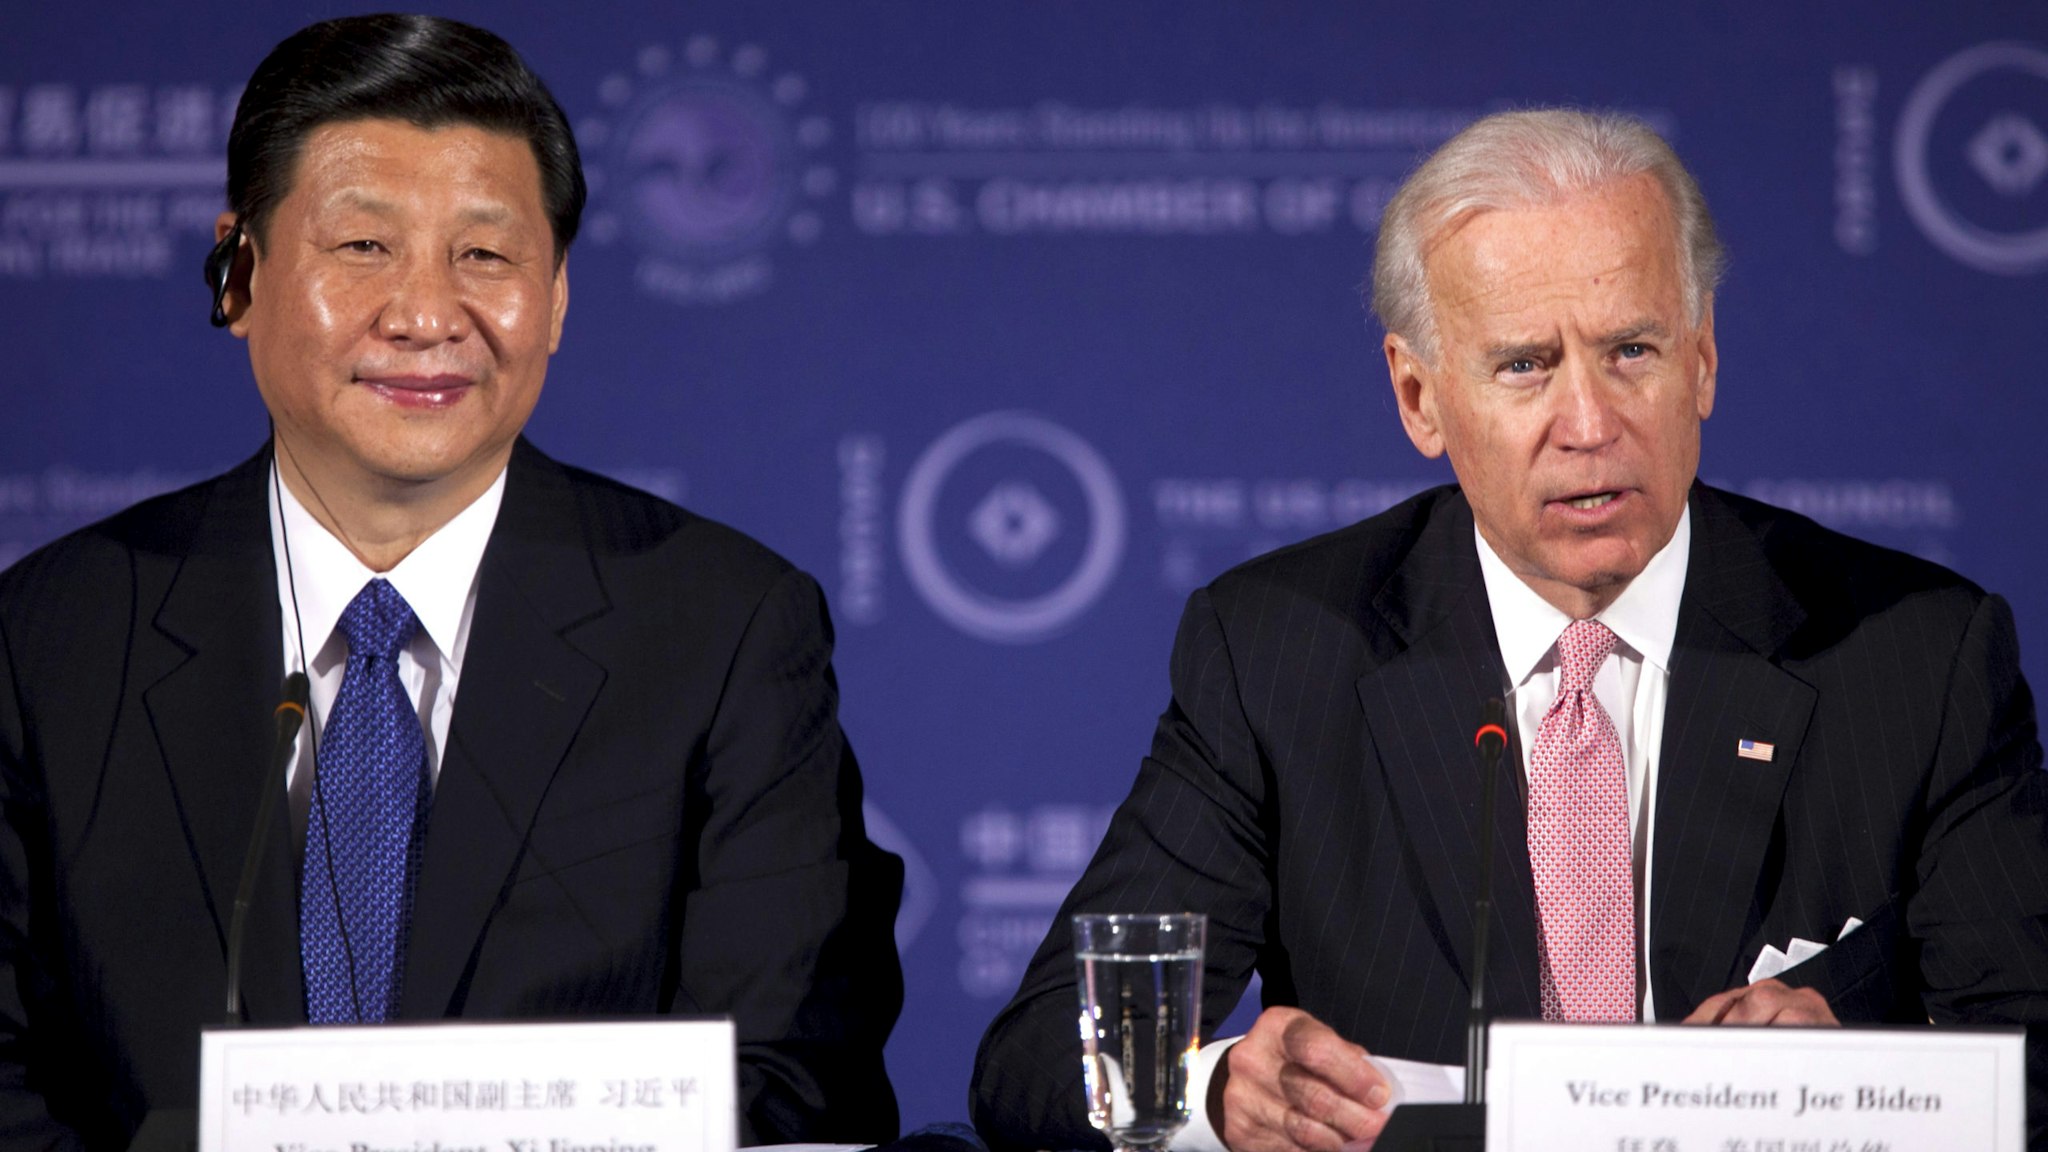 Xi Jinping, vice president of China, left, listens as U.S. Vice President Joe Biden speaks during the U.S.-China Business Roundtable at the Chamber of Commerce in Washington, D.C., U.S., on Tuesday, Feb. 14, 2012. President Barack Obama told Chinese Vice President Xi Jinping that China's growing economic power brings with it responsibility to work toward "balanced" trade and to recognize the aspirations of all people for greater rights.